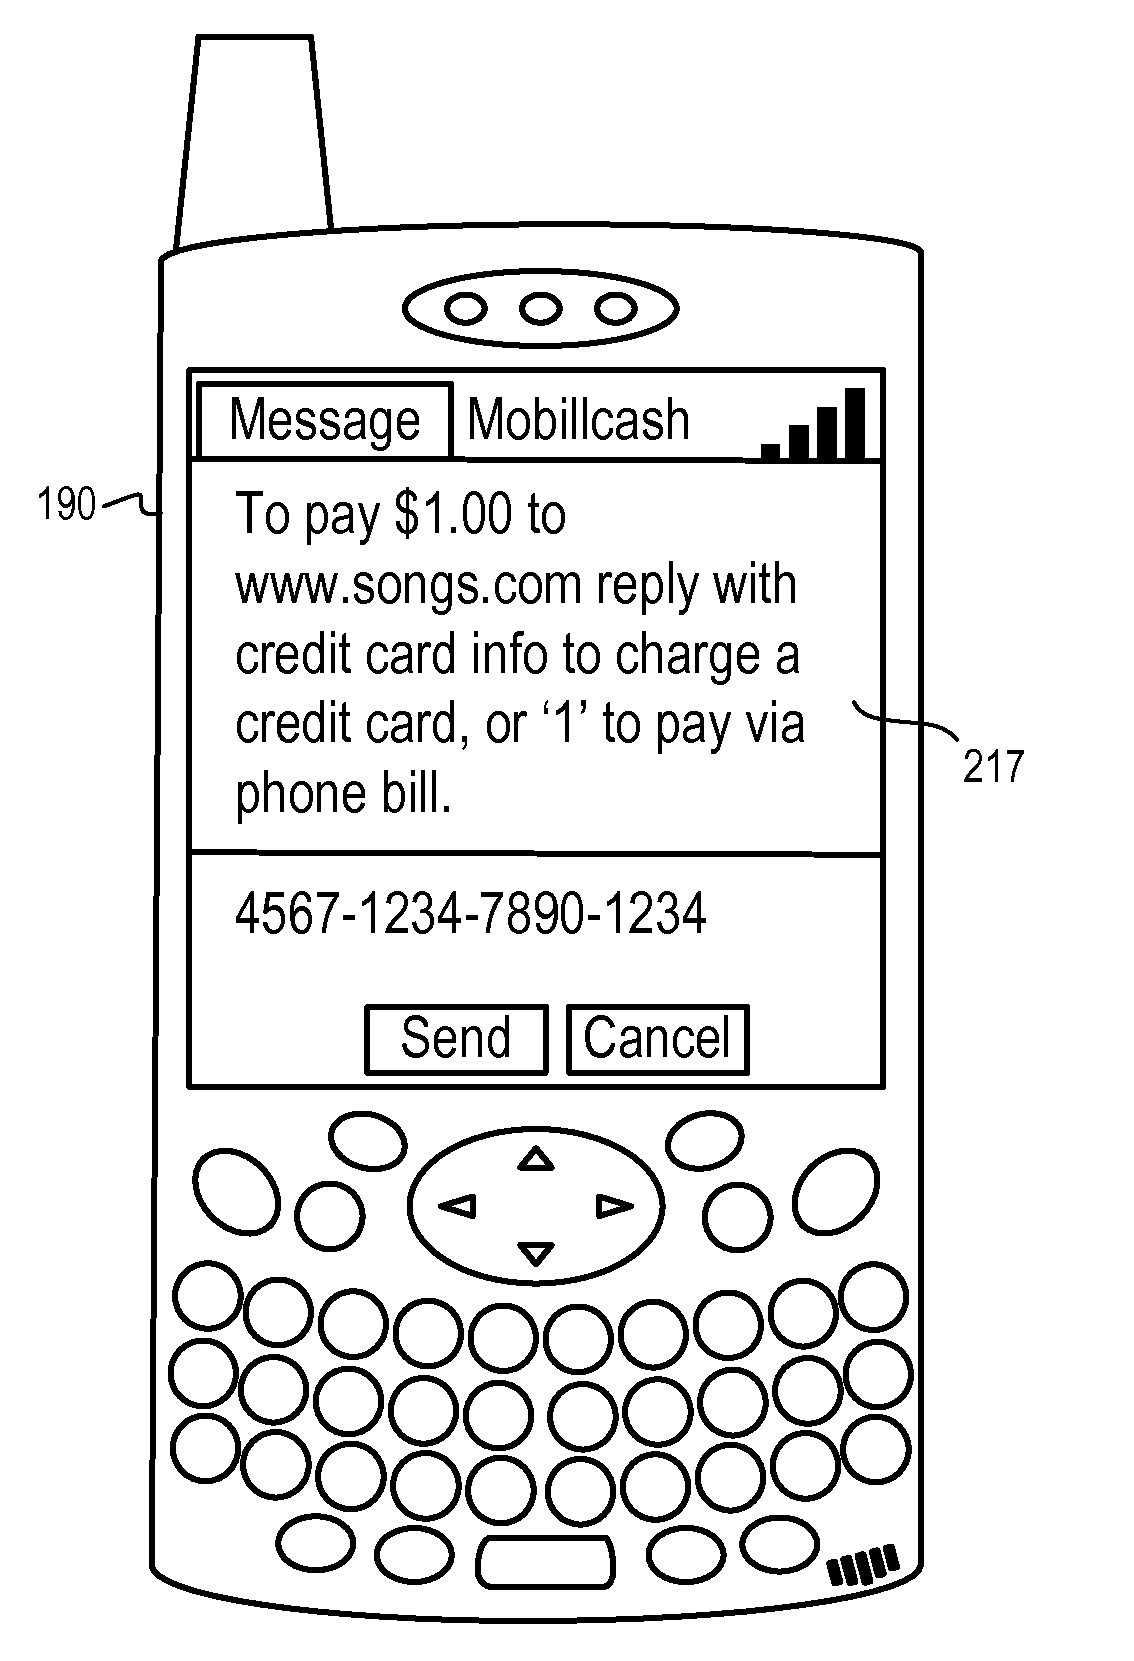 Systems and Methods to Facilitate Purchases on Mobile Devices